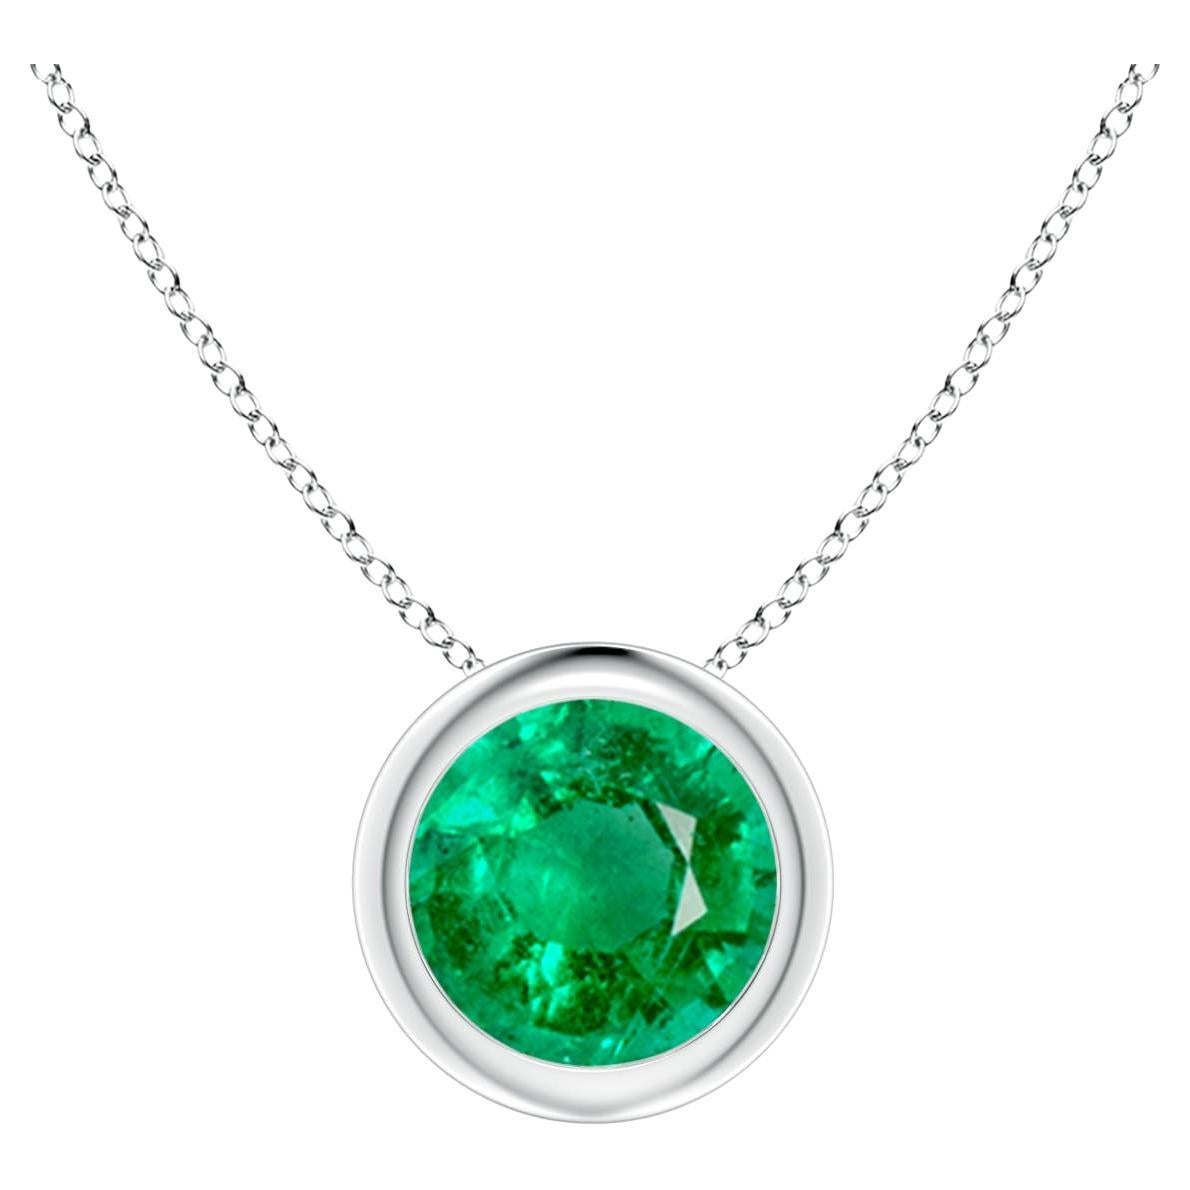 Natural Bezel-Set Round Emerald Solitaire Pendant in 14K White Gold (6mm)